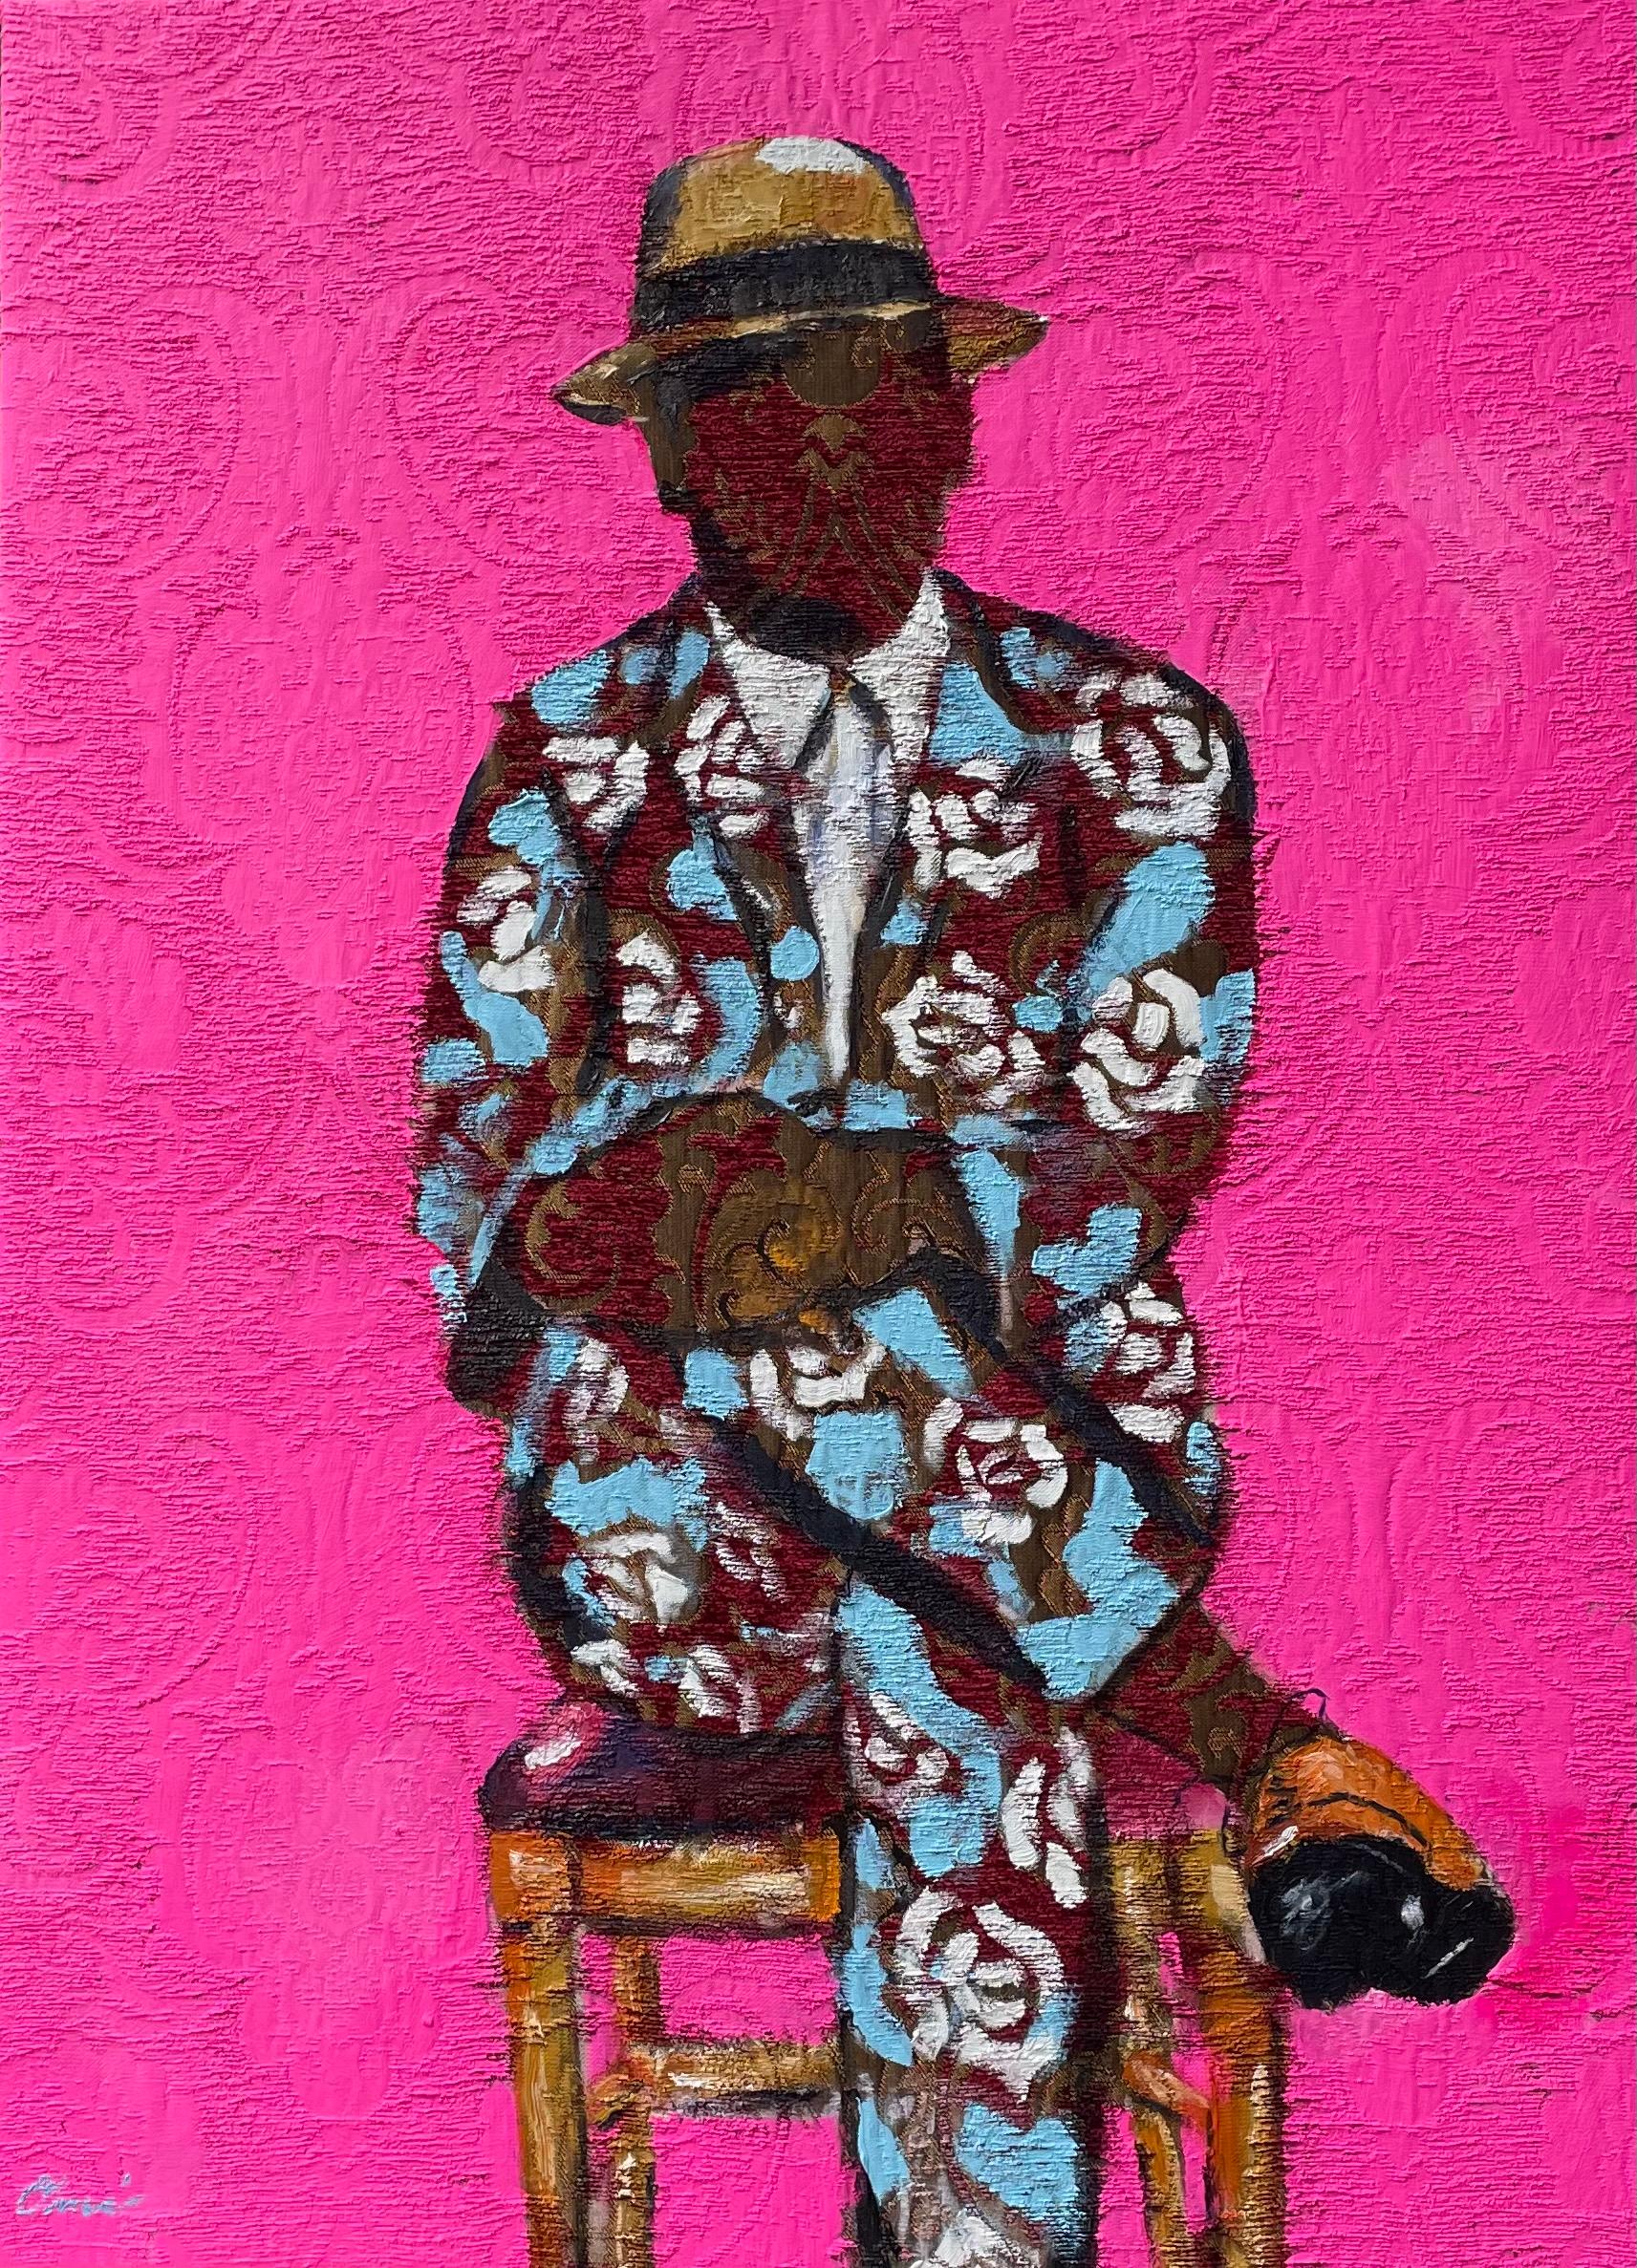 Omari Booker Figurative Painting - HIS FLOWERS - Portrait Painting on Fabric, Pink, Blue, Floral